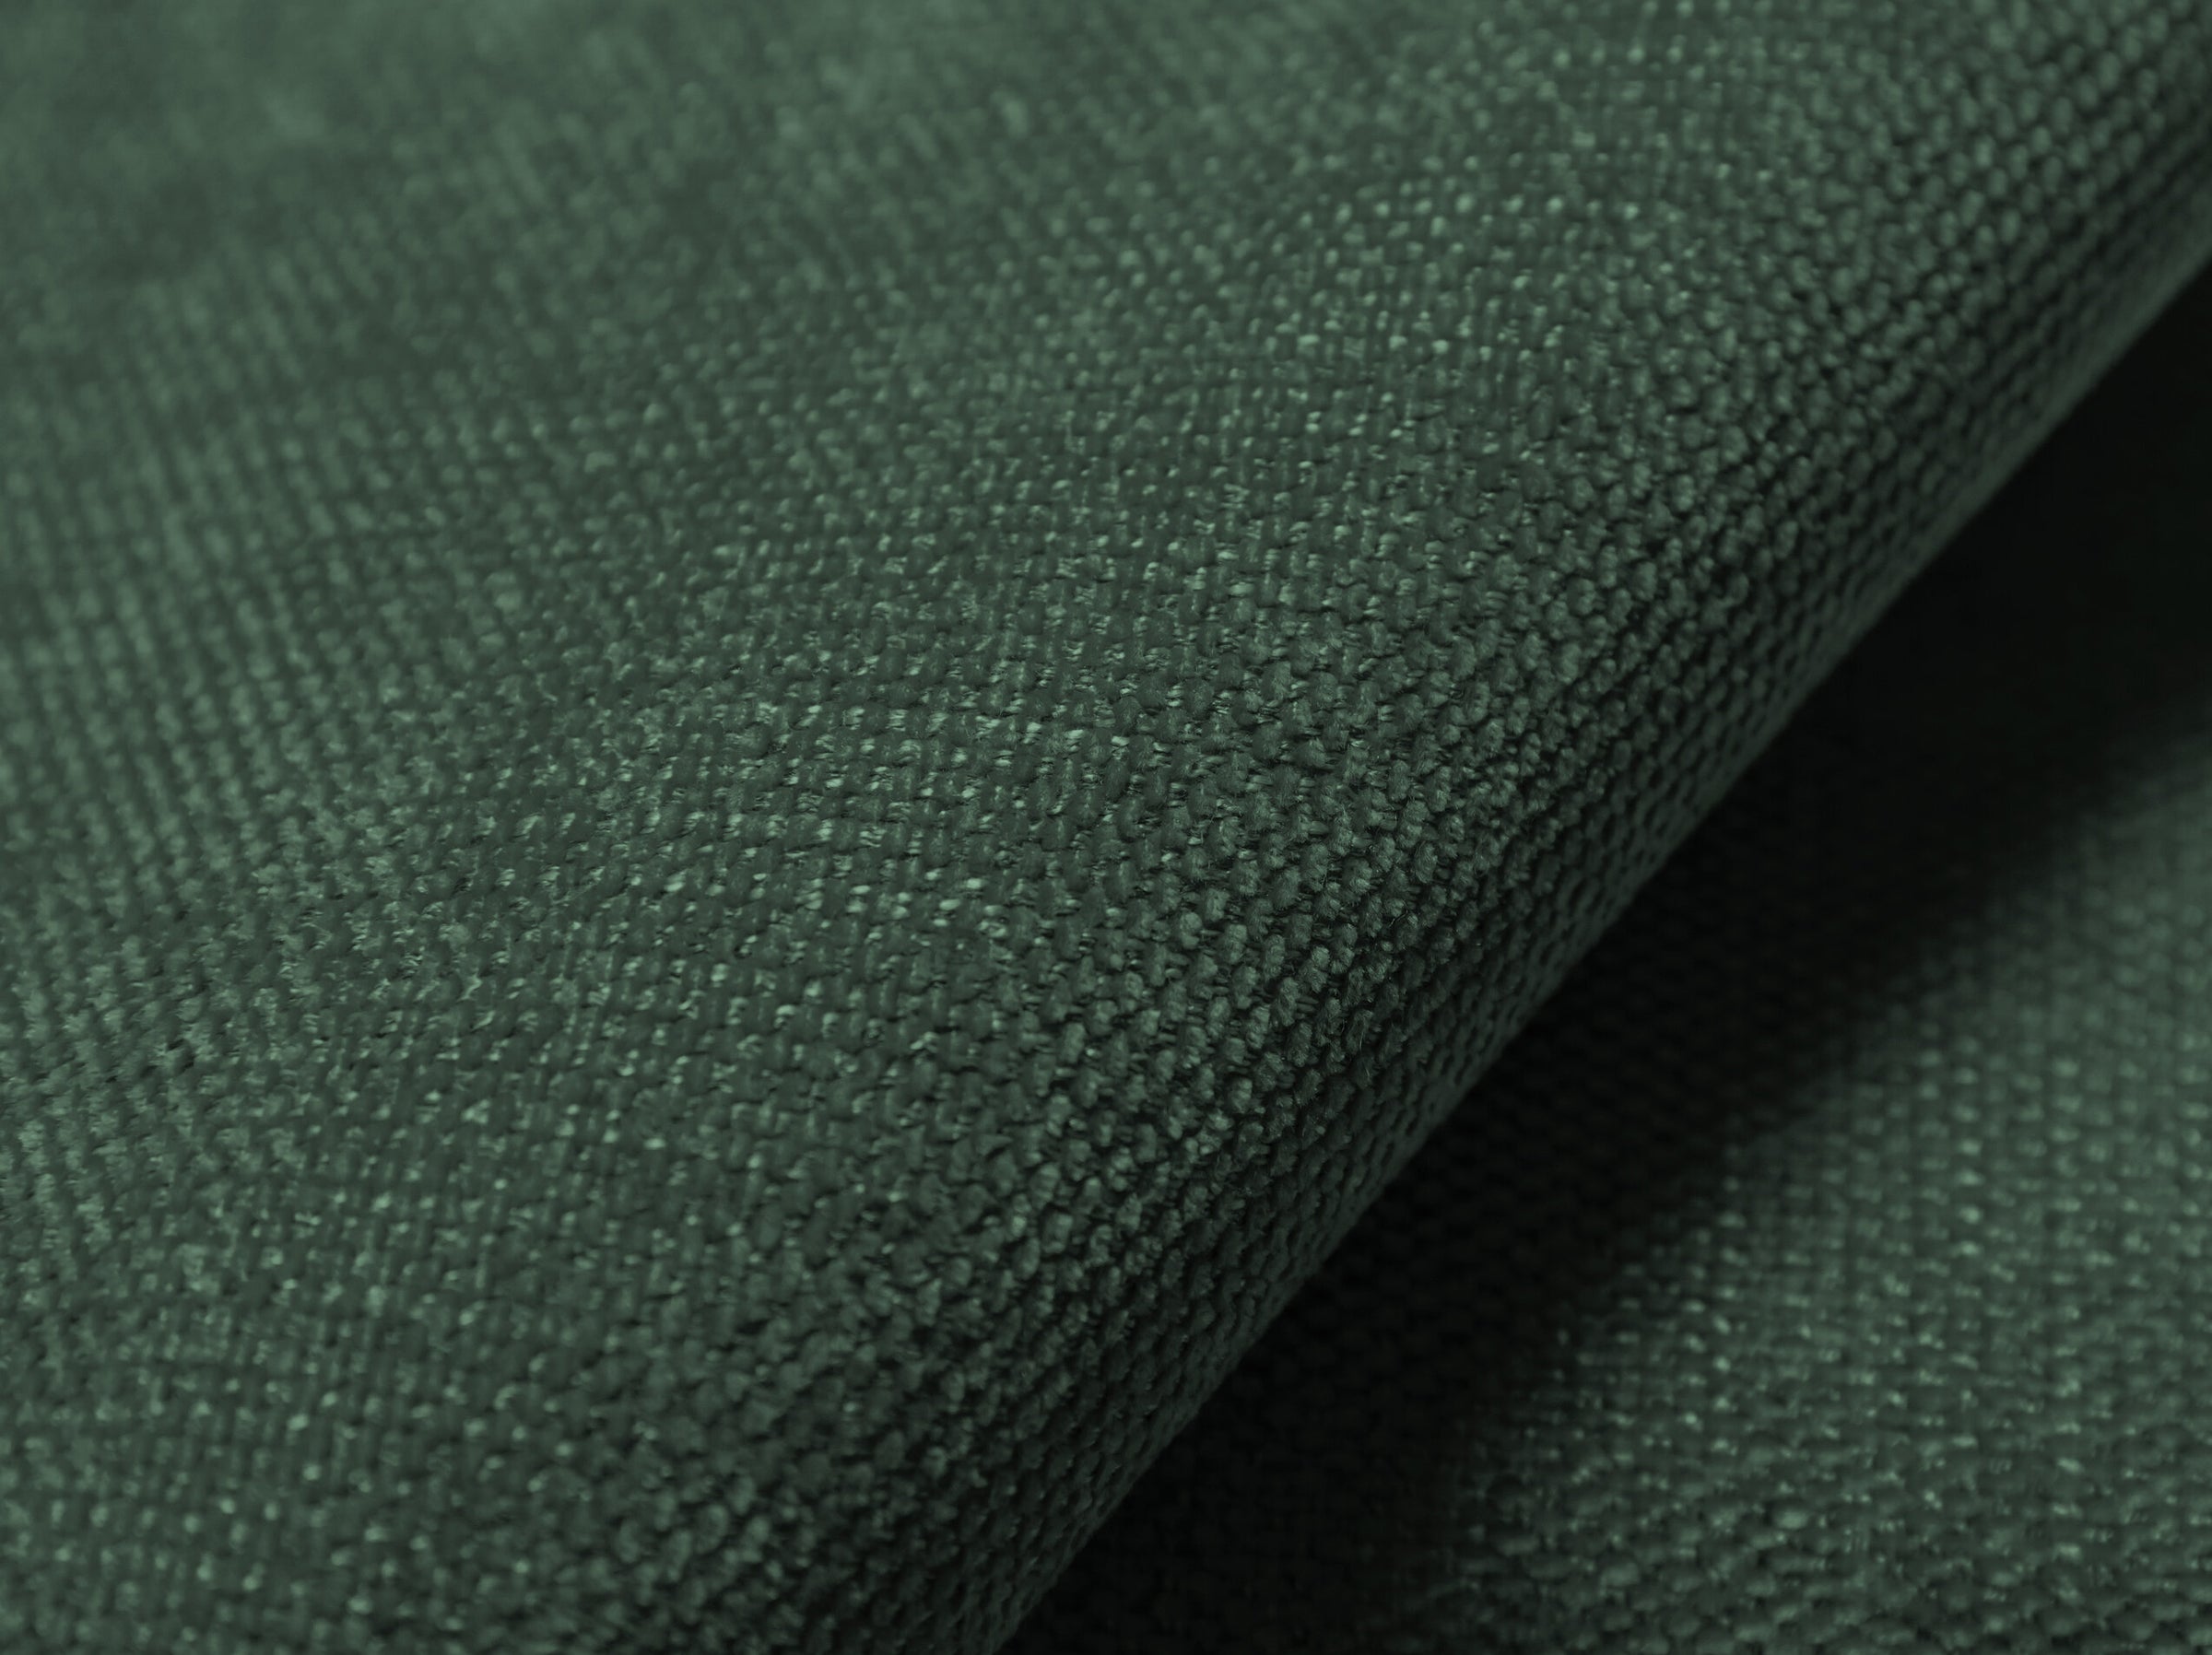 Agawa Structured fabric (Ros467) / Green 4